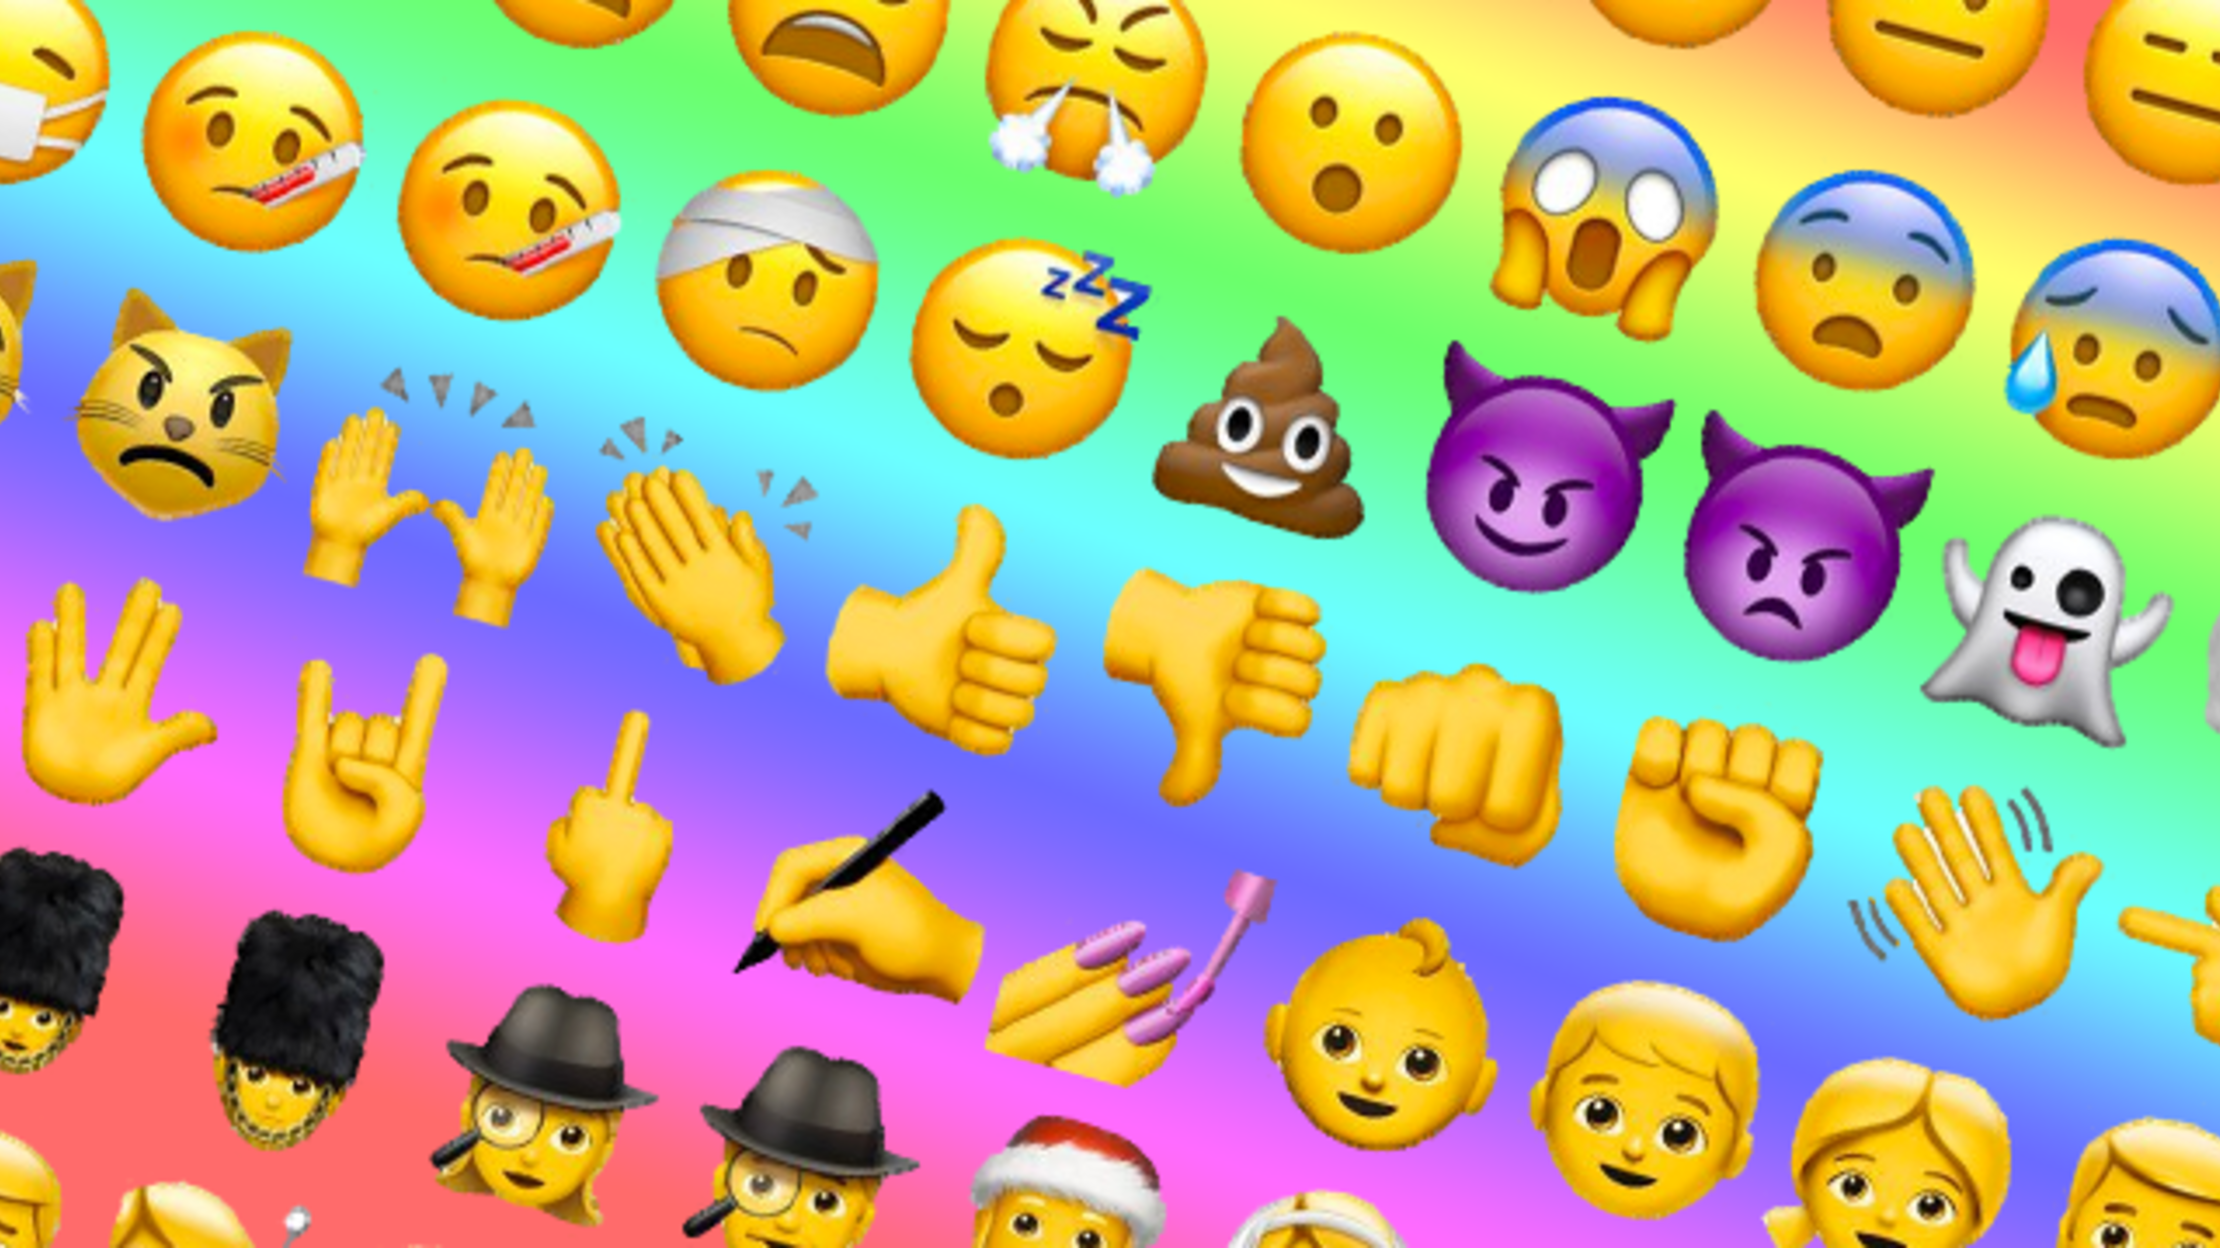 9 Smiley Facts About Emoji Mental Floss